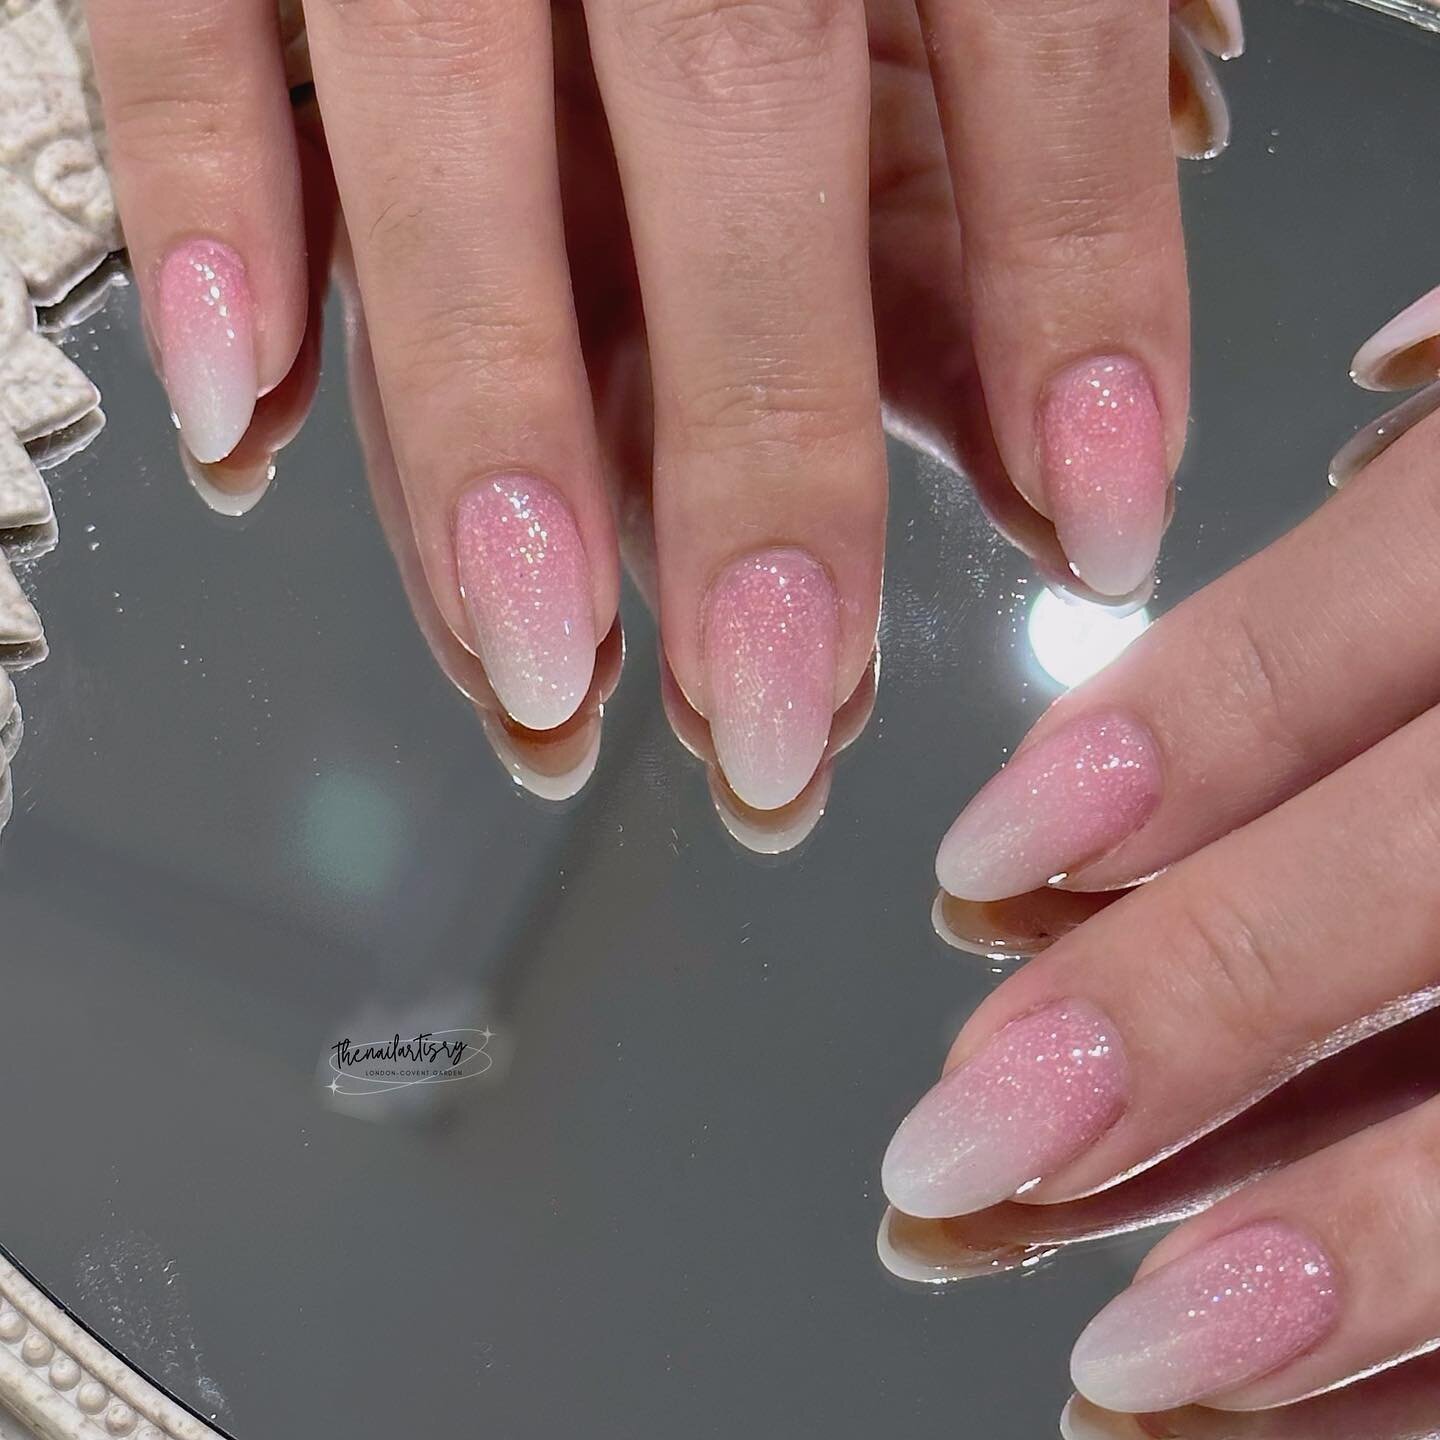 ⋆˙⟡♡ pretty in pink ⋆˙⟡♡

💖 Gradient Colour Transition aka Ombre Design is one of most popular service in our salon. It is natural yet elegant looking 💘🫧🫶🏻

📲 To book this kind of set: Please select Ombre Powder under Nail Enhancement services 